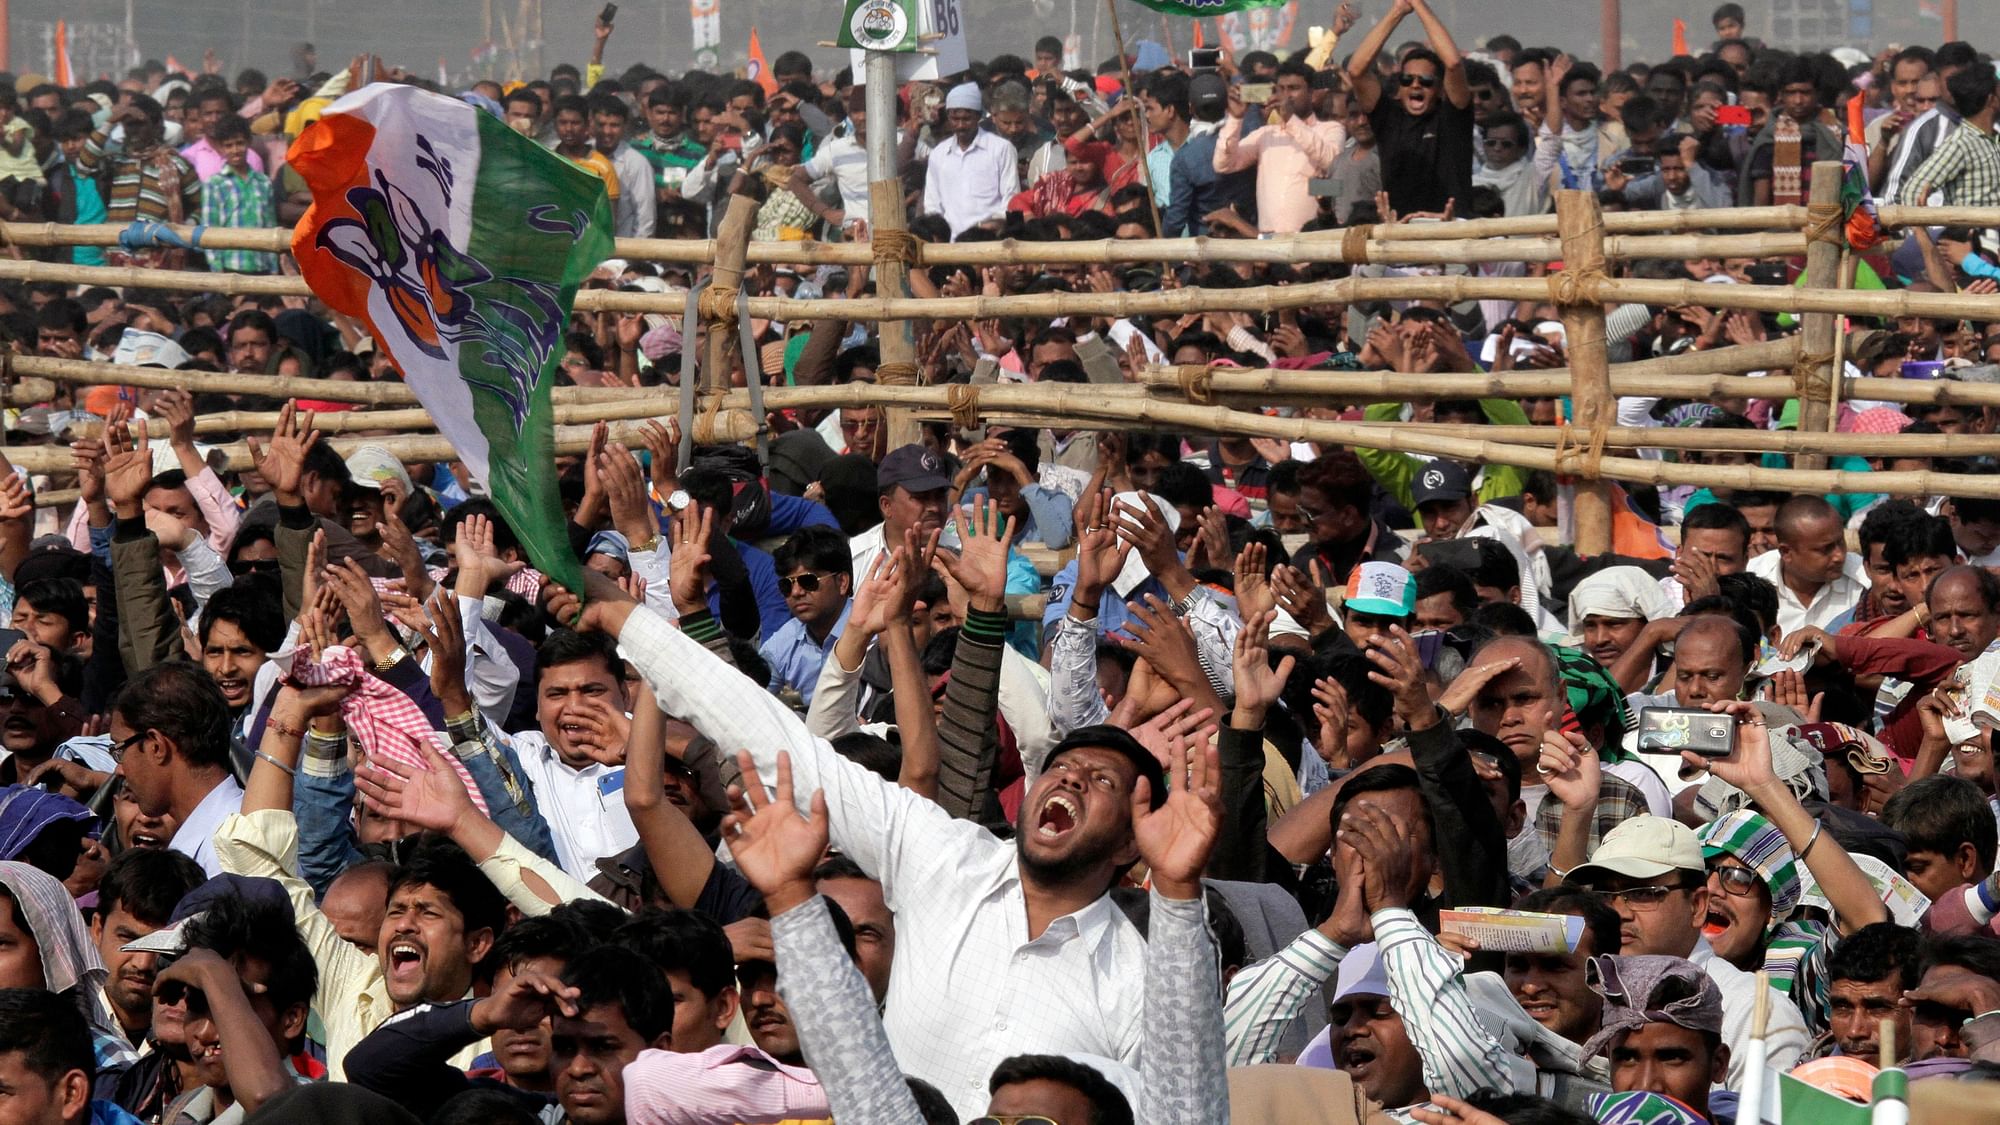 Supporters of Trinamool Congress party shout slogans during a public rally organized by Trinamool Congress party in Kolkata.